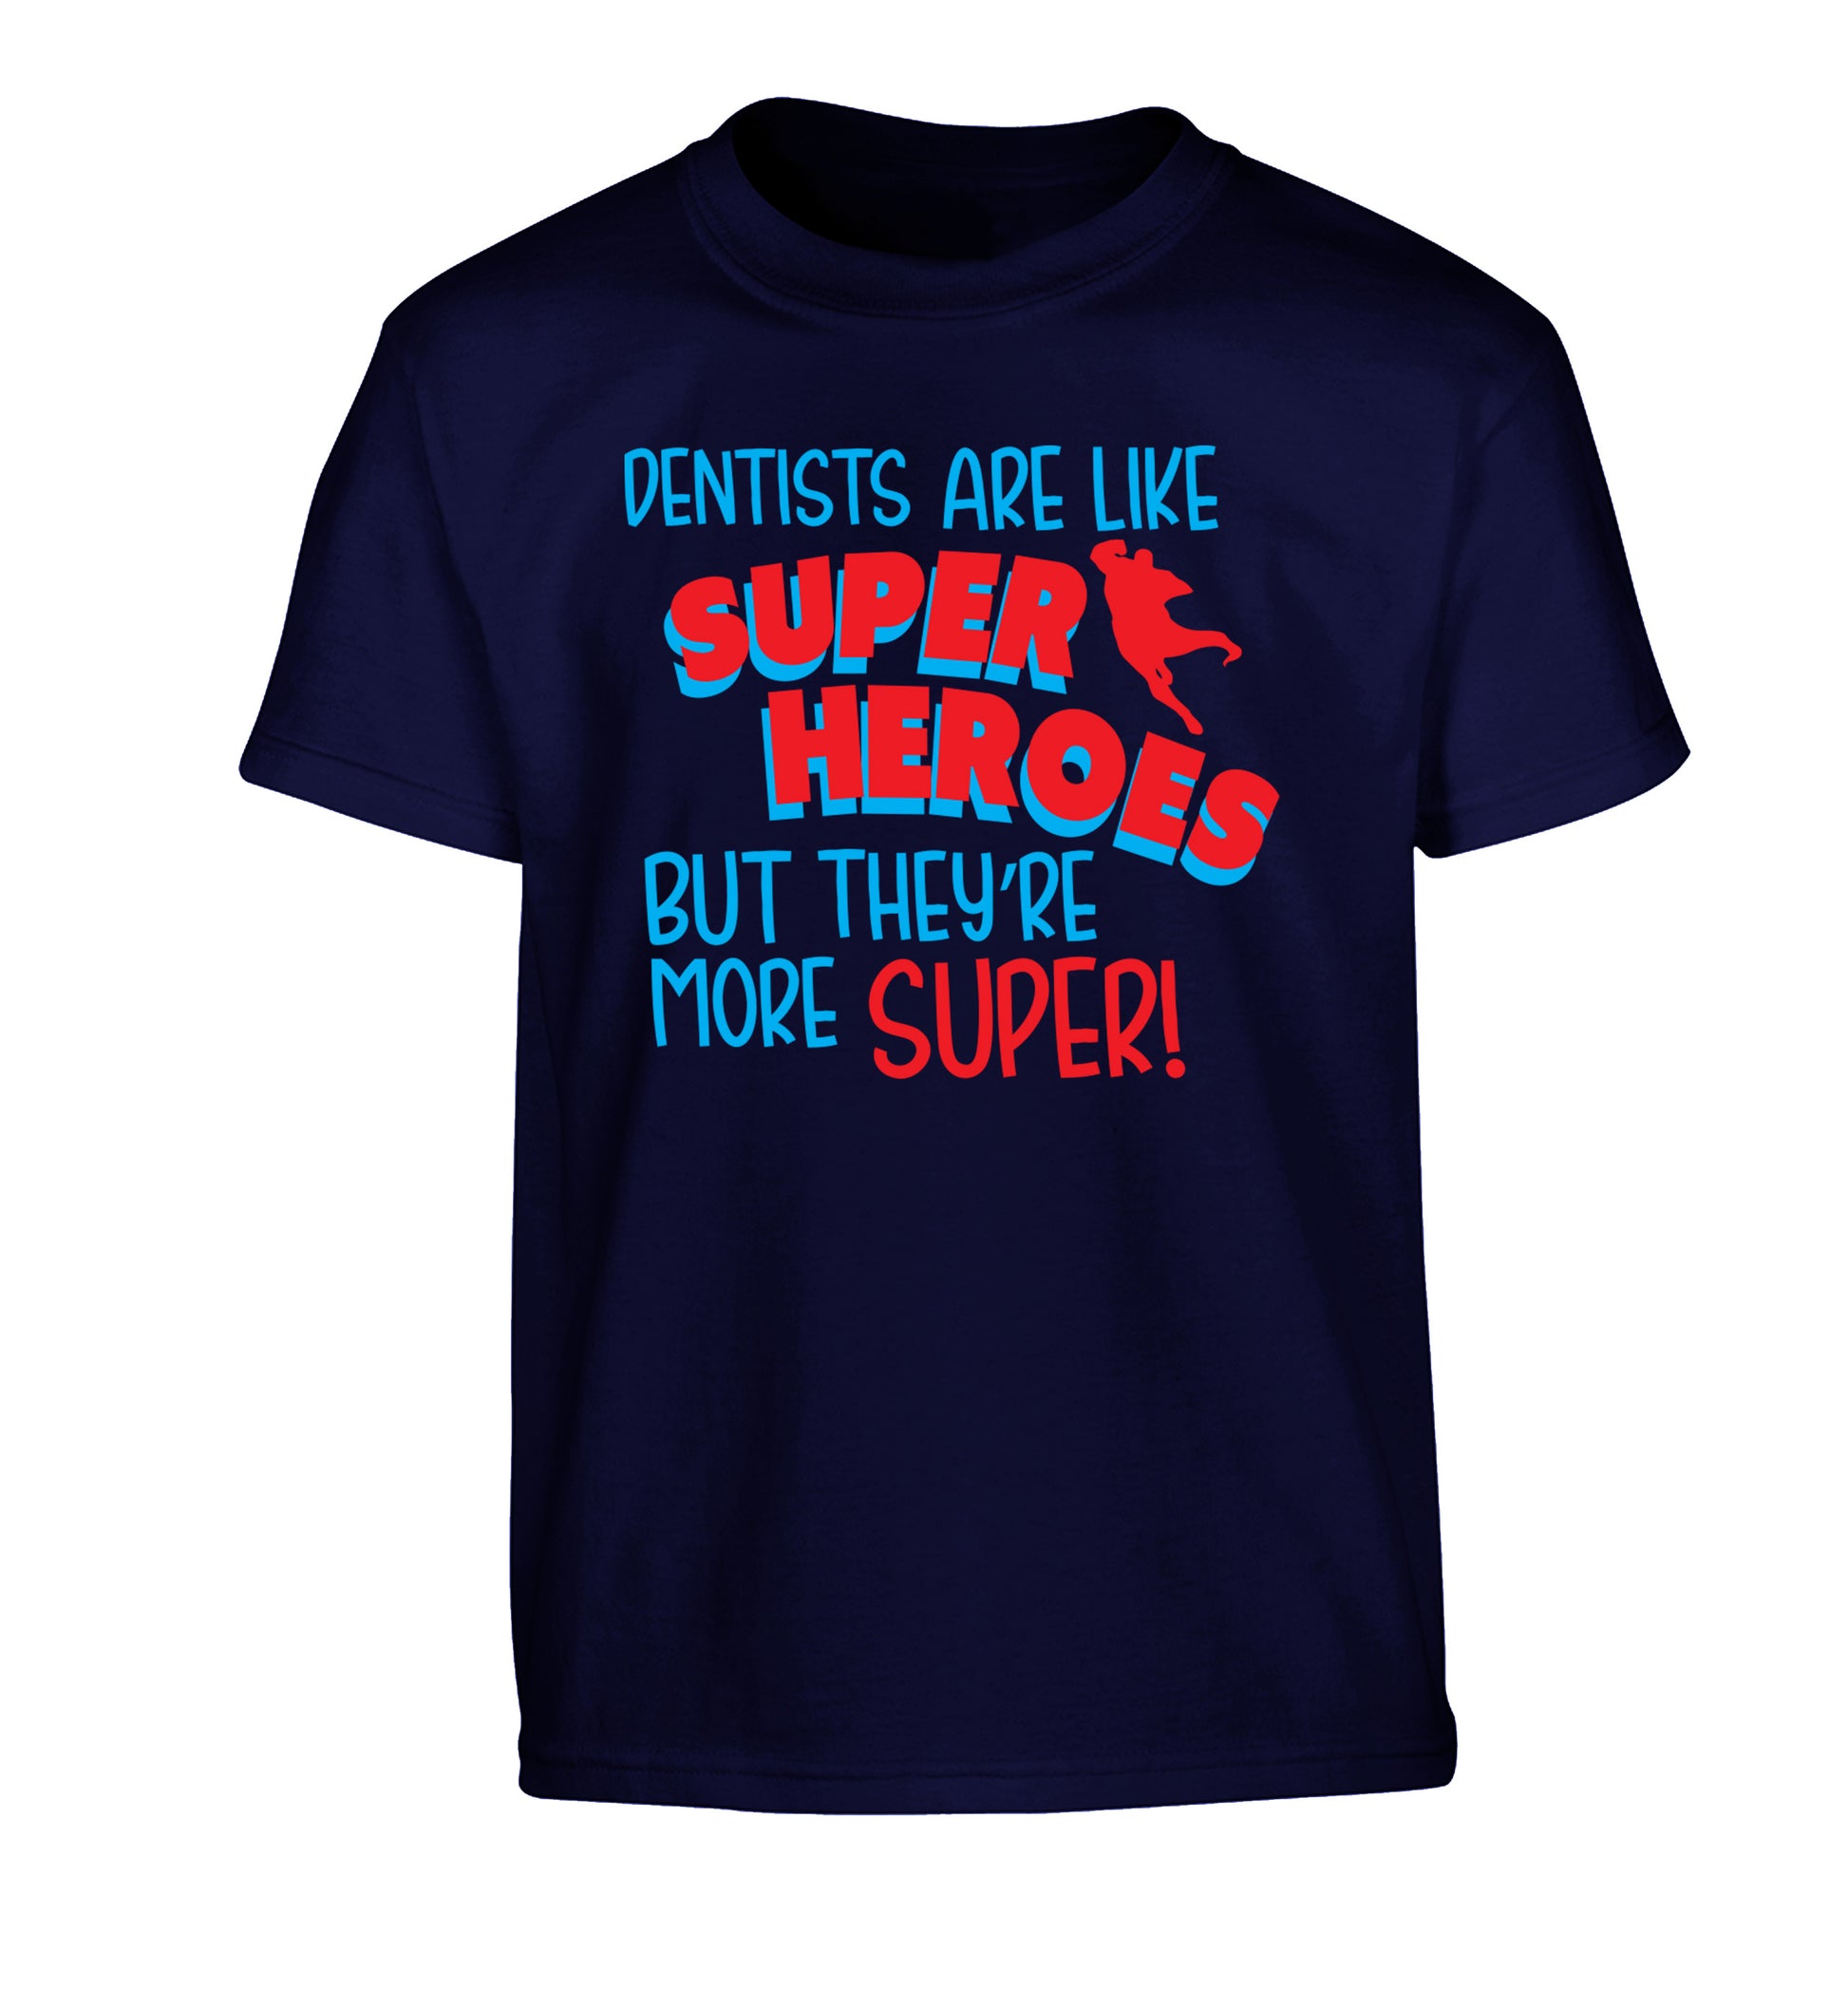 Dentists are like superheros but they're more super Children's navy Tshirt 12-13 Years